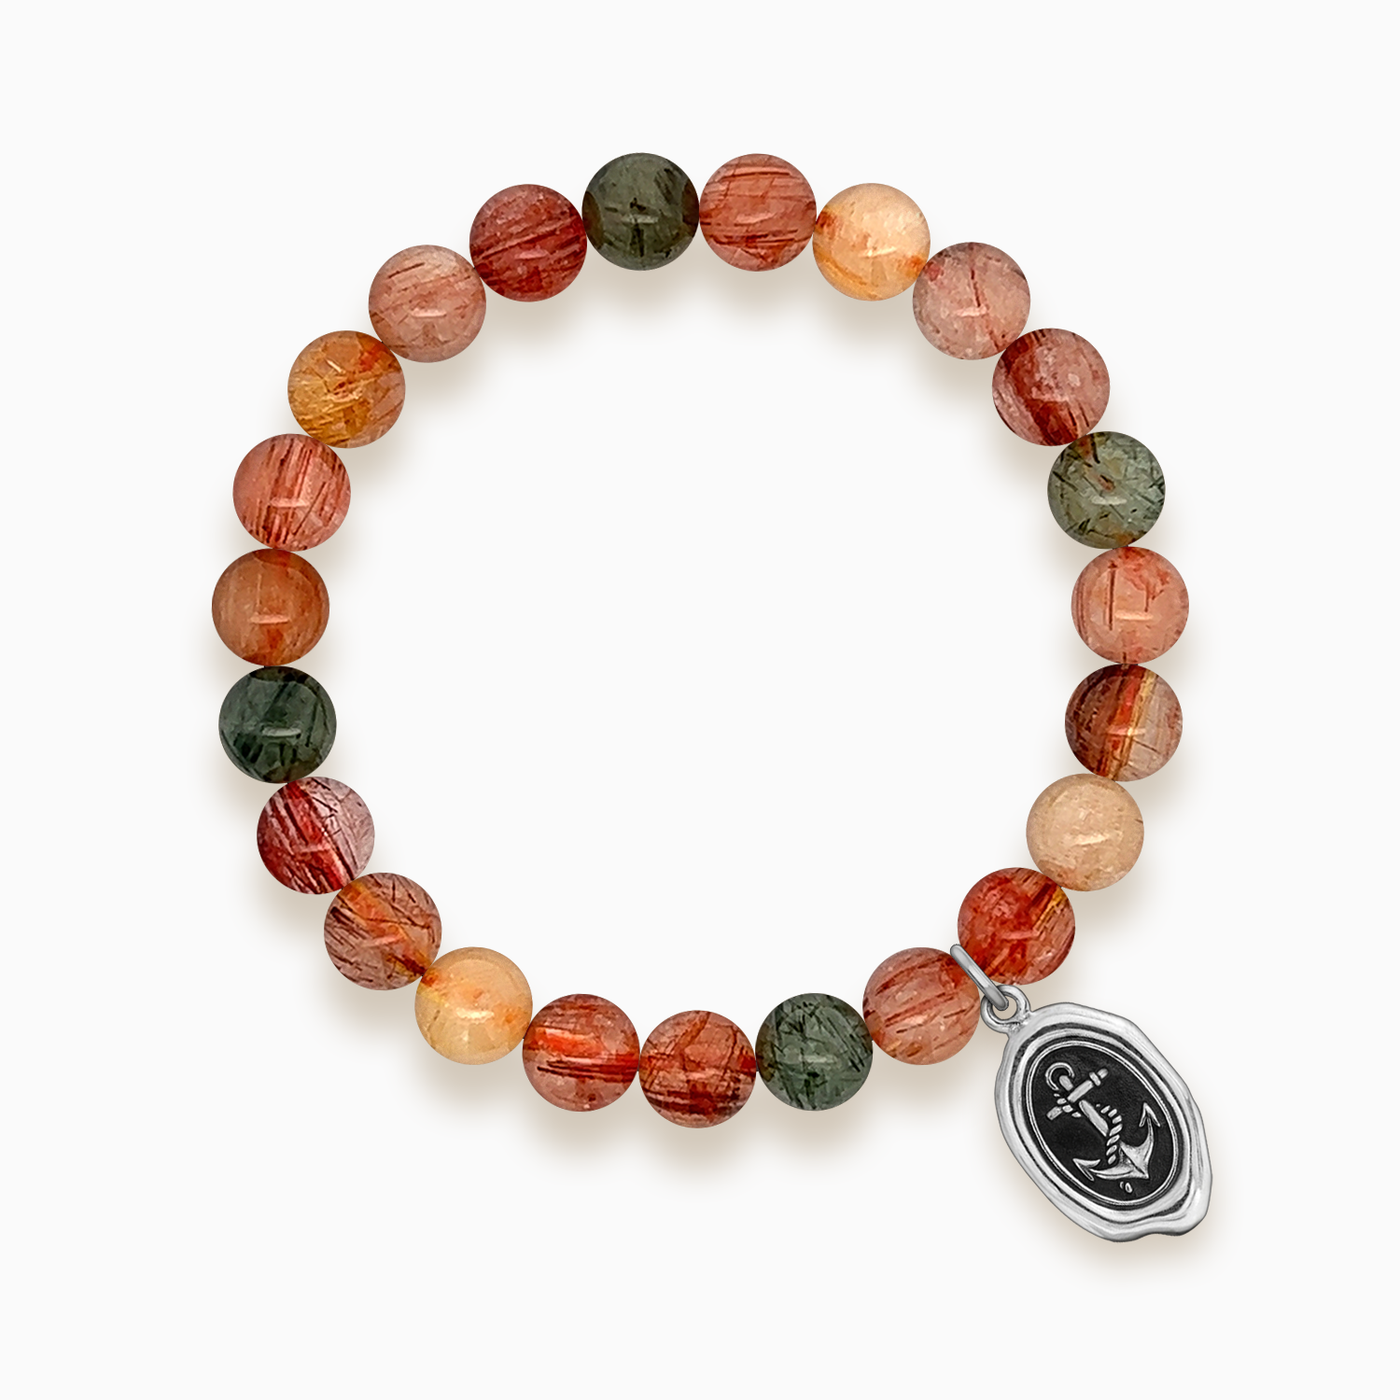 Gemstone Stacker Bracelet With Wax Seal Anchor Charm